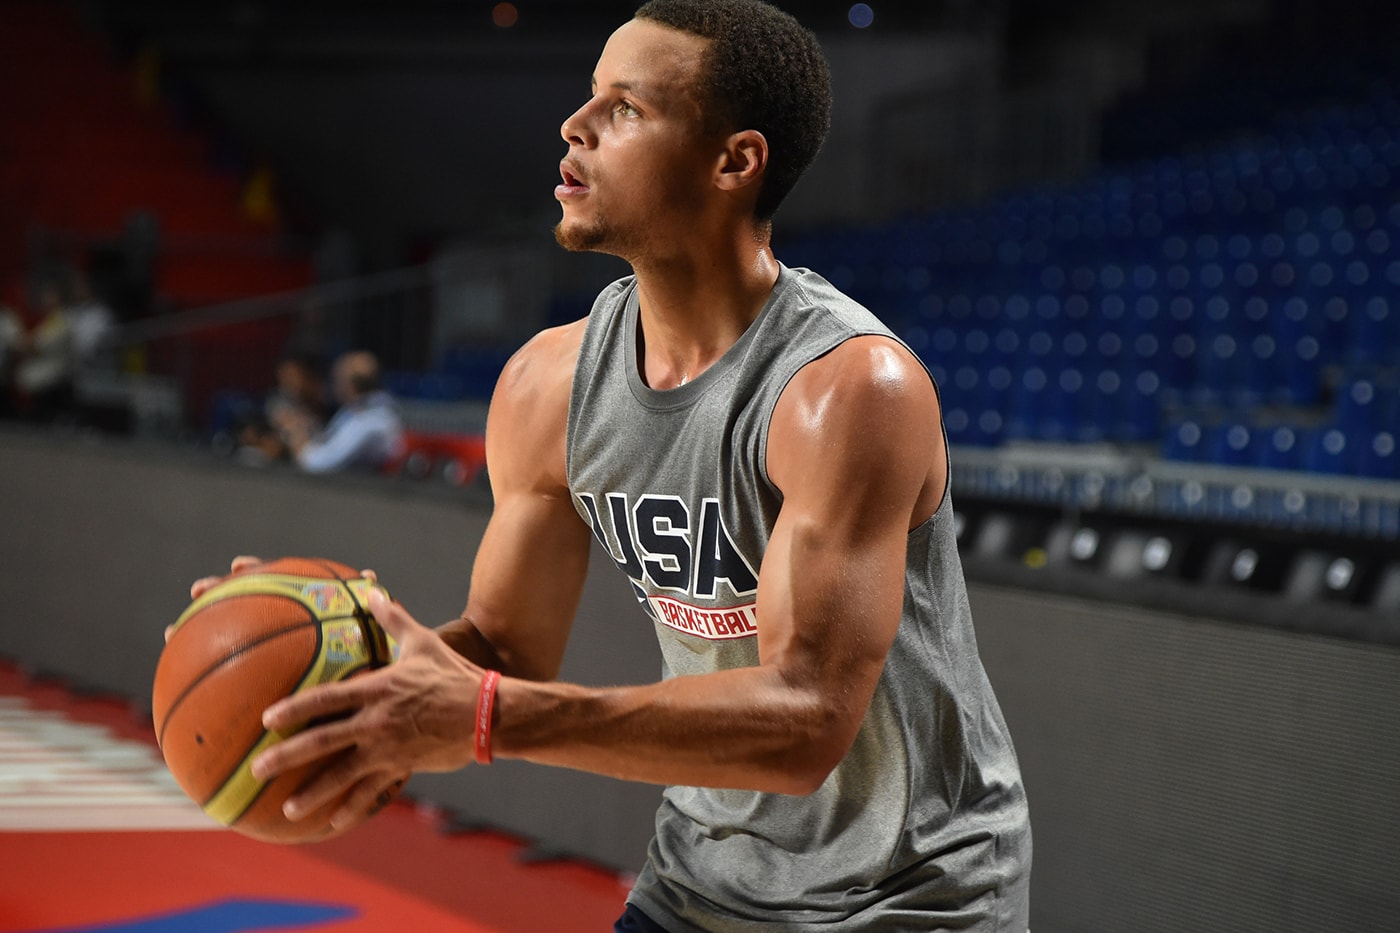 Steph Curry Speaks on His Plans To Join Team USA in the 2024 Olympics paris basketball france steve kerr nba golden state warriors